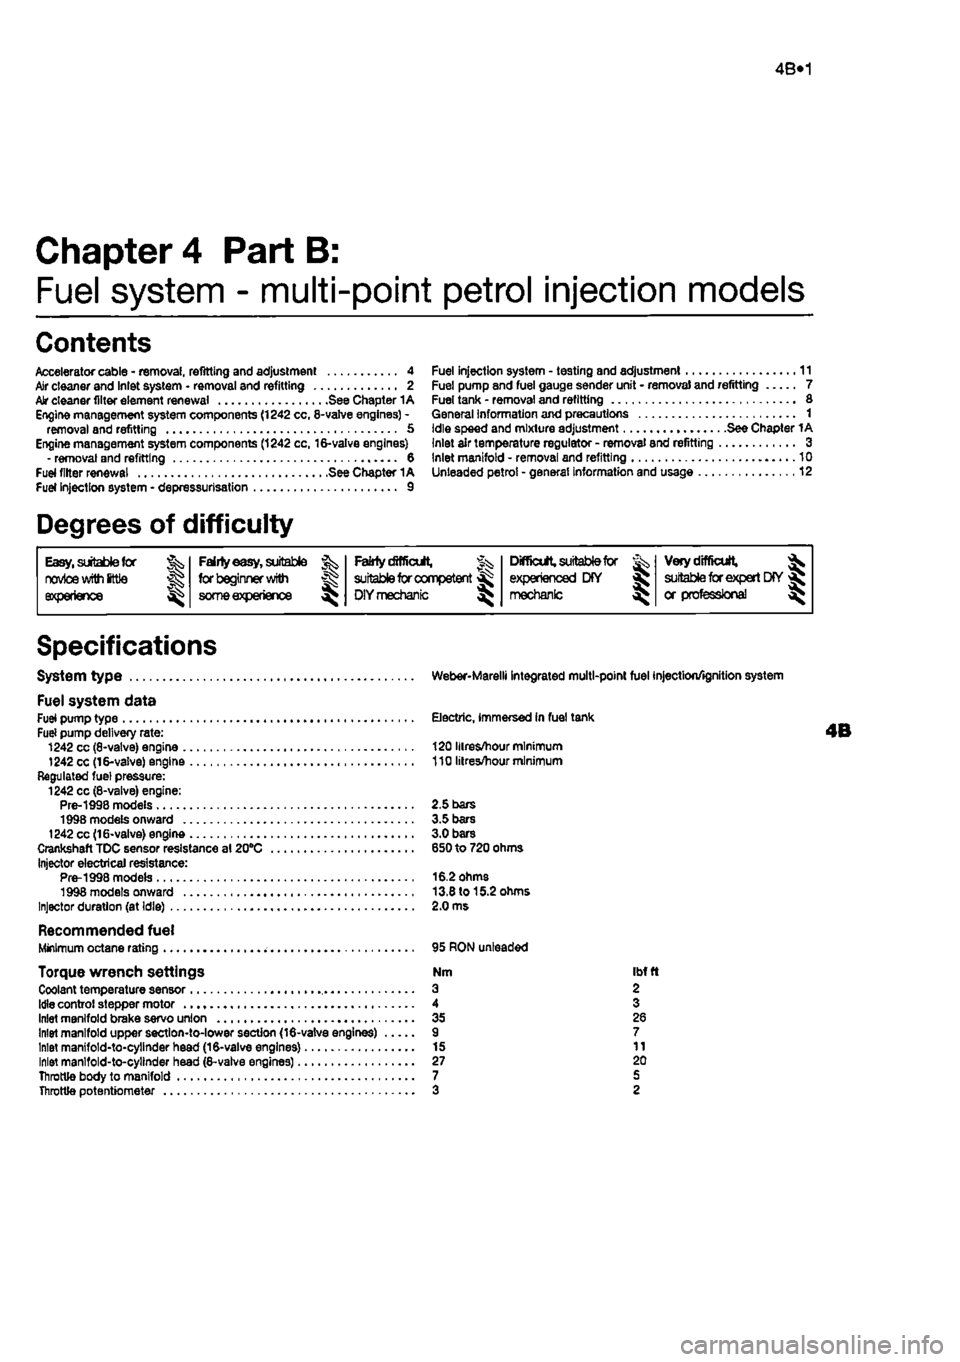 FIAT PUNTO 1997 176 / 1.G Service Manual 
4B*1 
Chapter 4 Part B: 
Fuel system - multi-point petrol injection models 
Contents 
Accelerator cable - removal, refitting and adjustment 4 Air cleaner and Inlet system • removal and refitting 2 